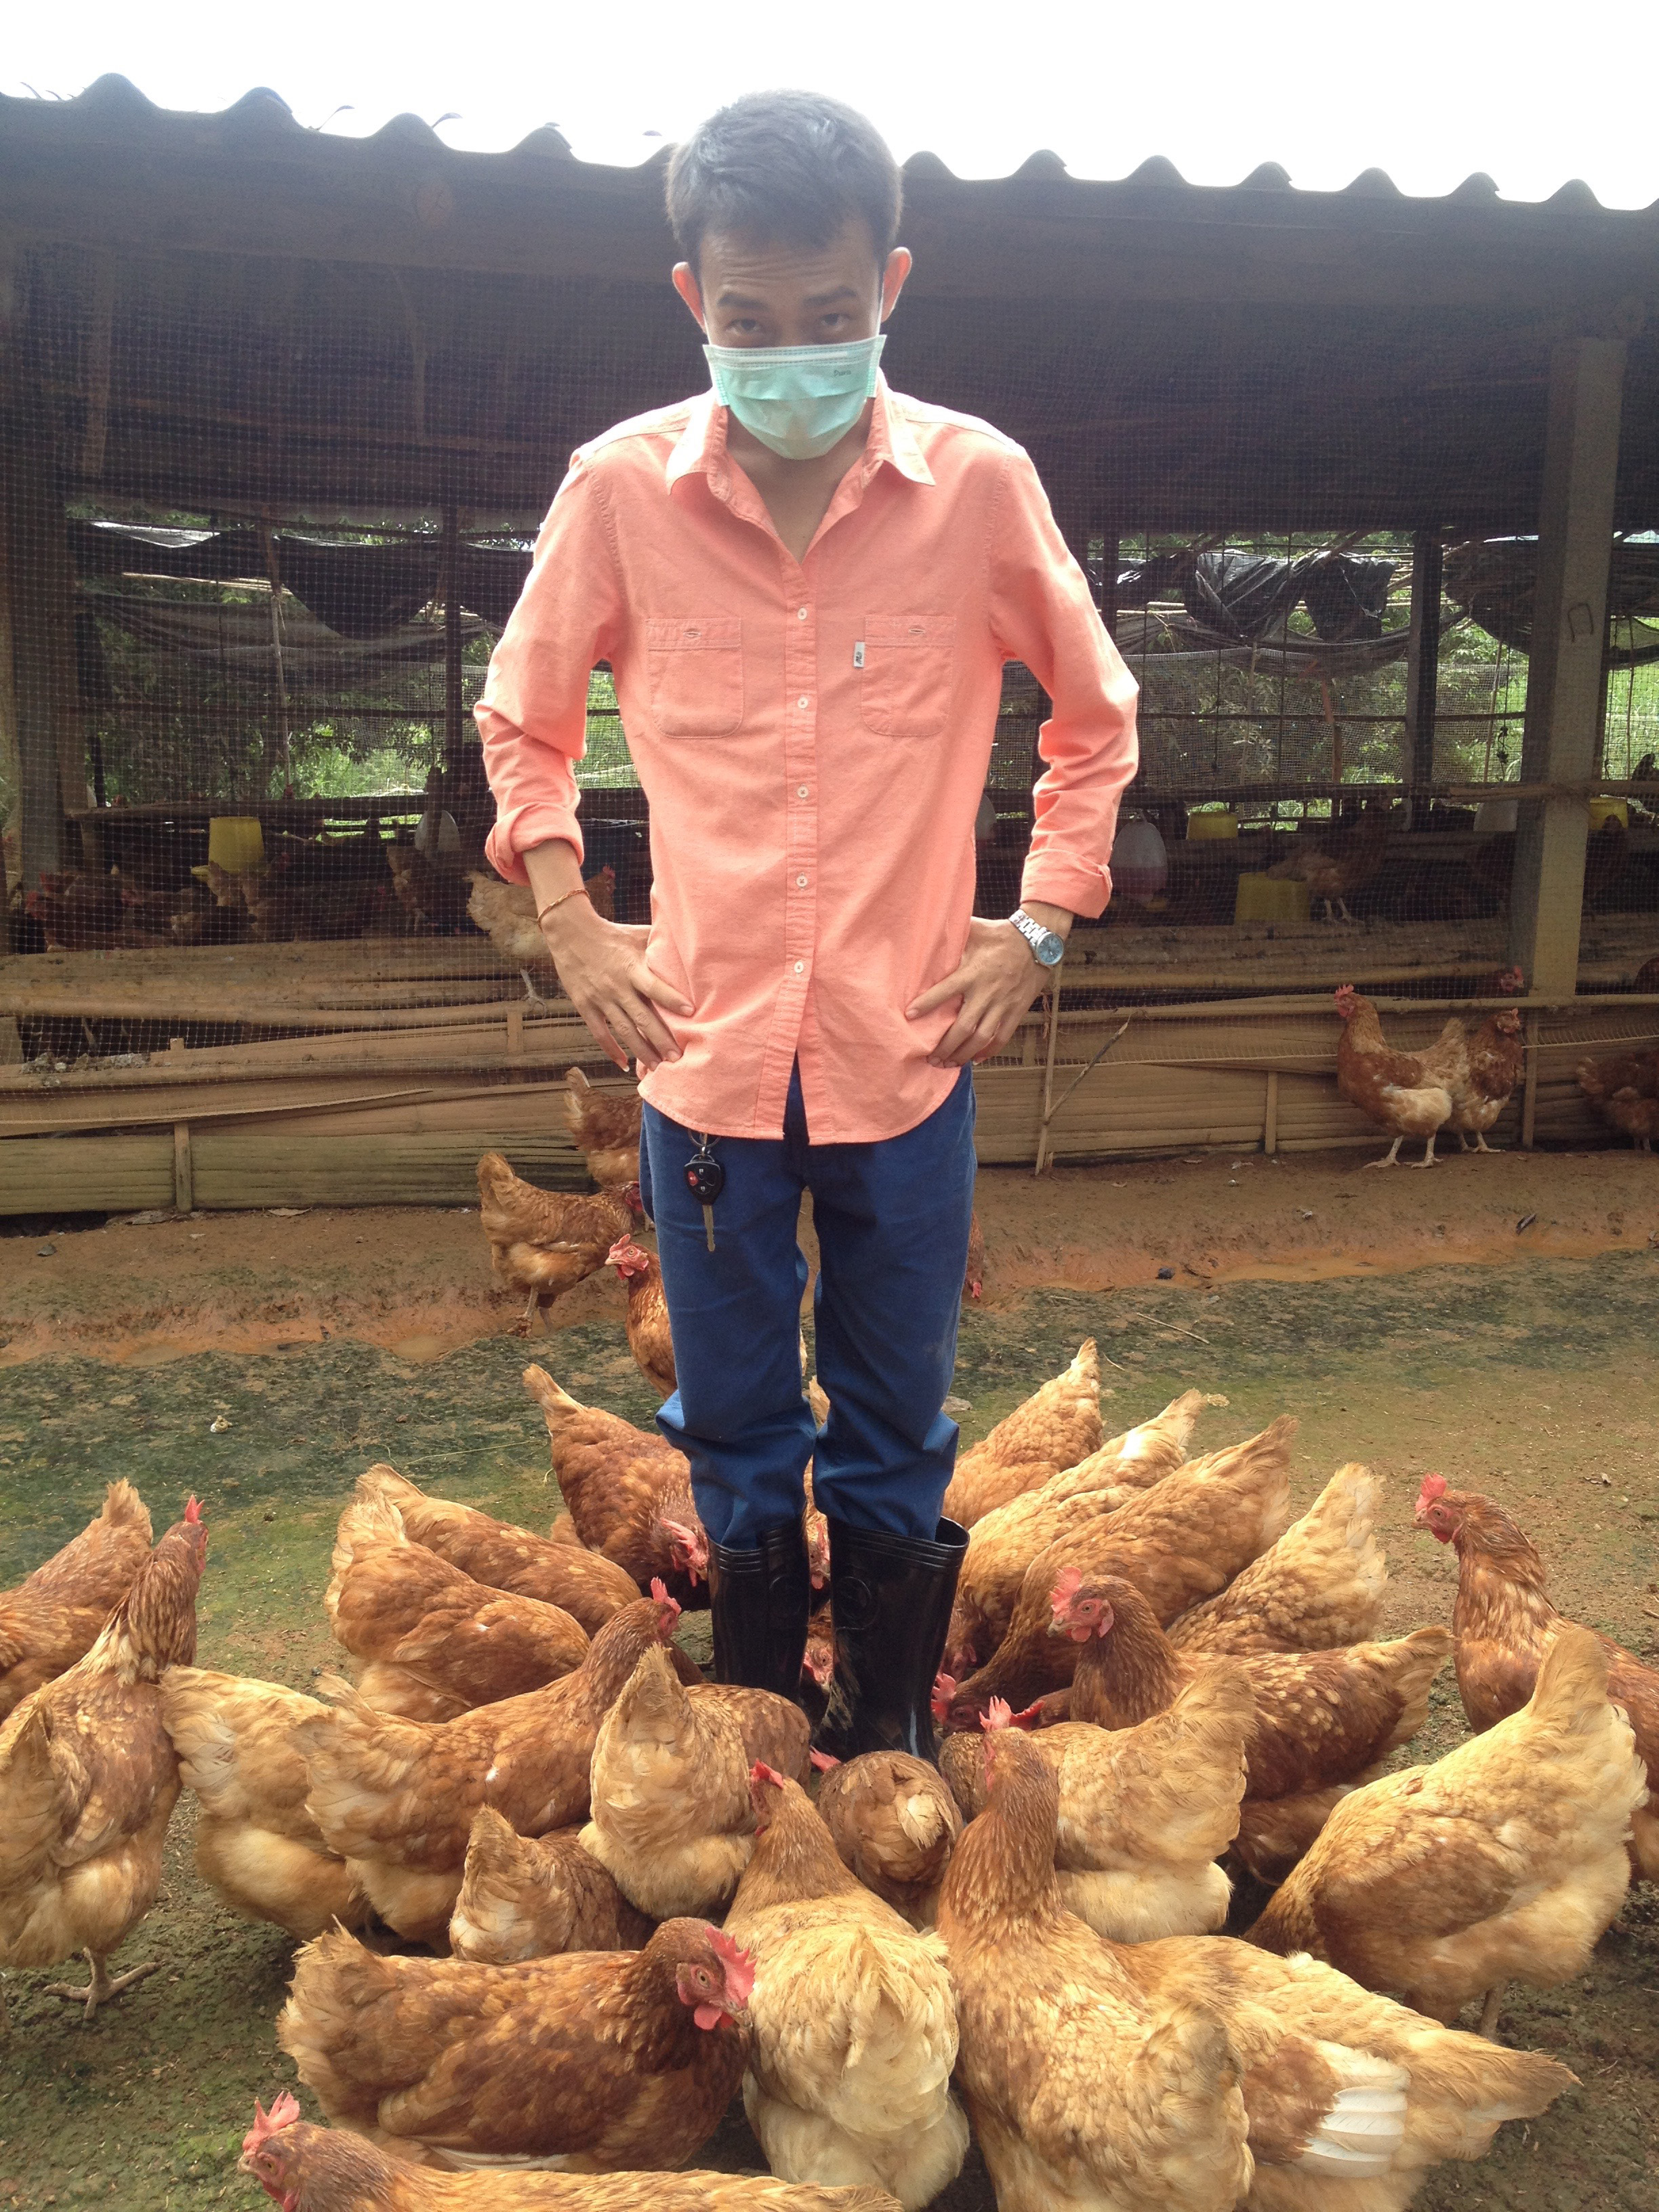 a man stands with about 15 chickens around him